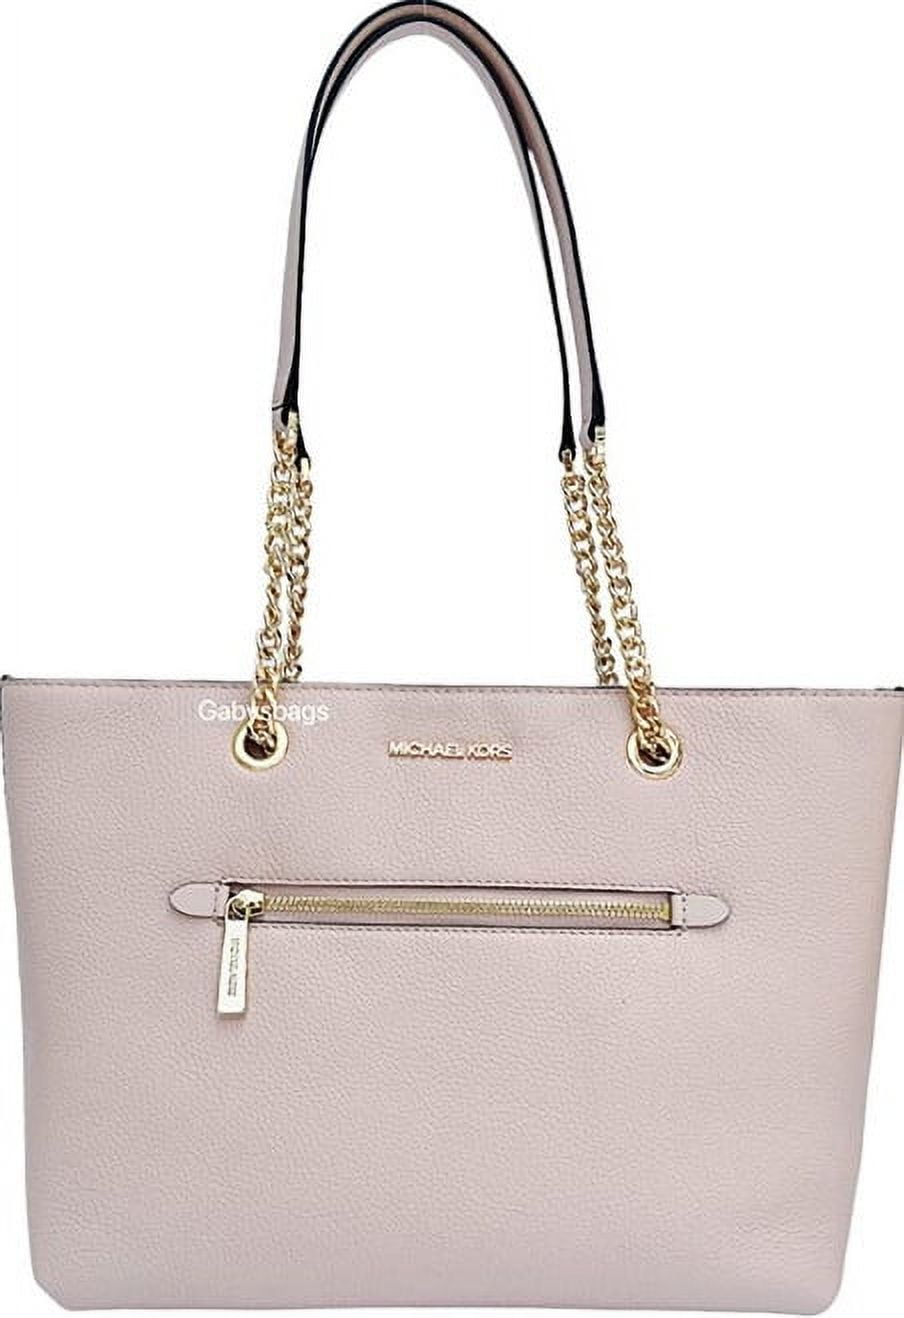 Michael Kors Jet Set Medium Mulberry Leather Front Zip Chain Tote Bag